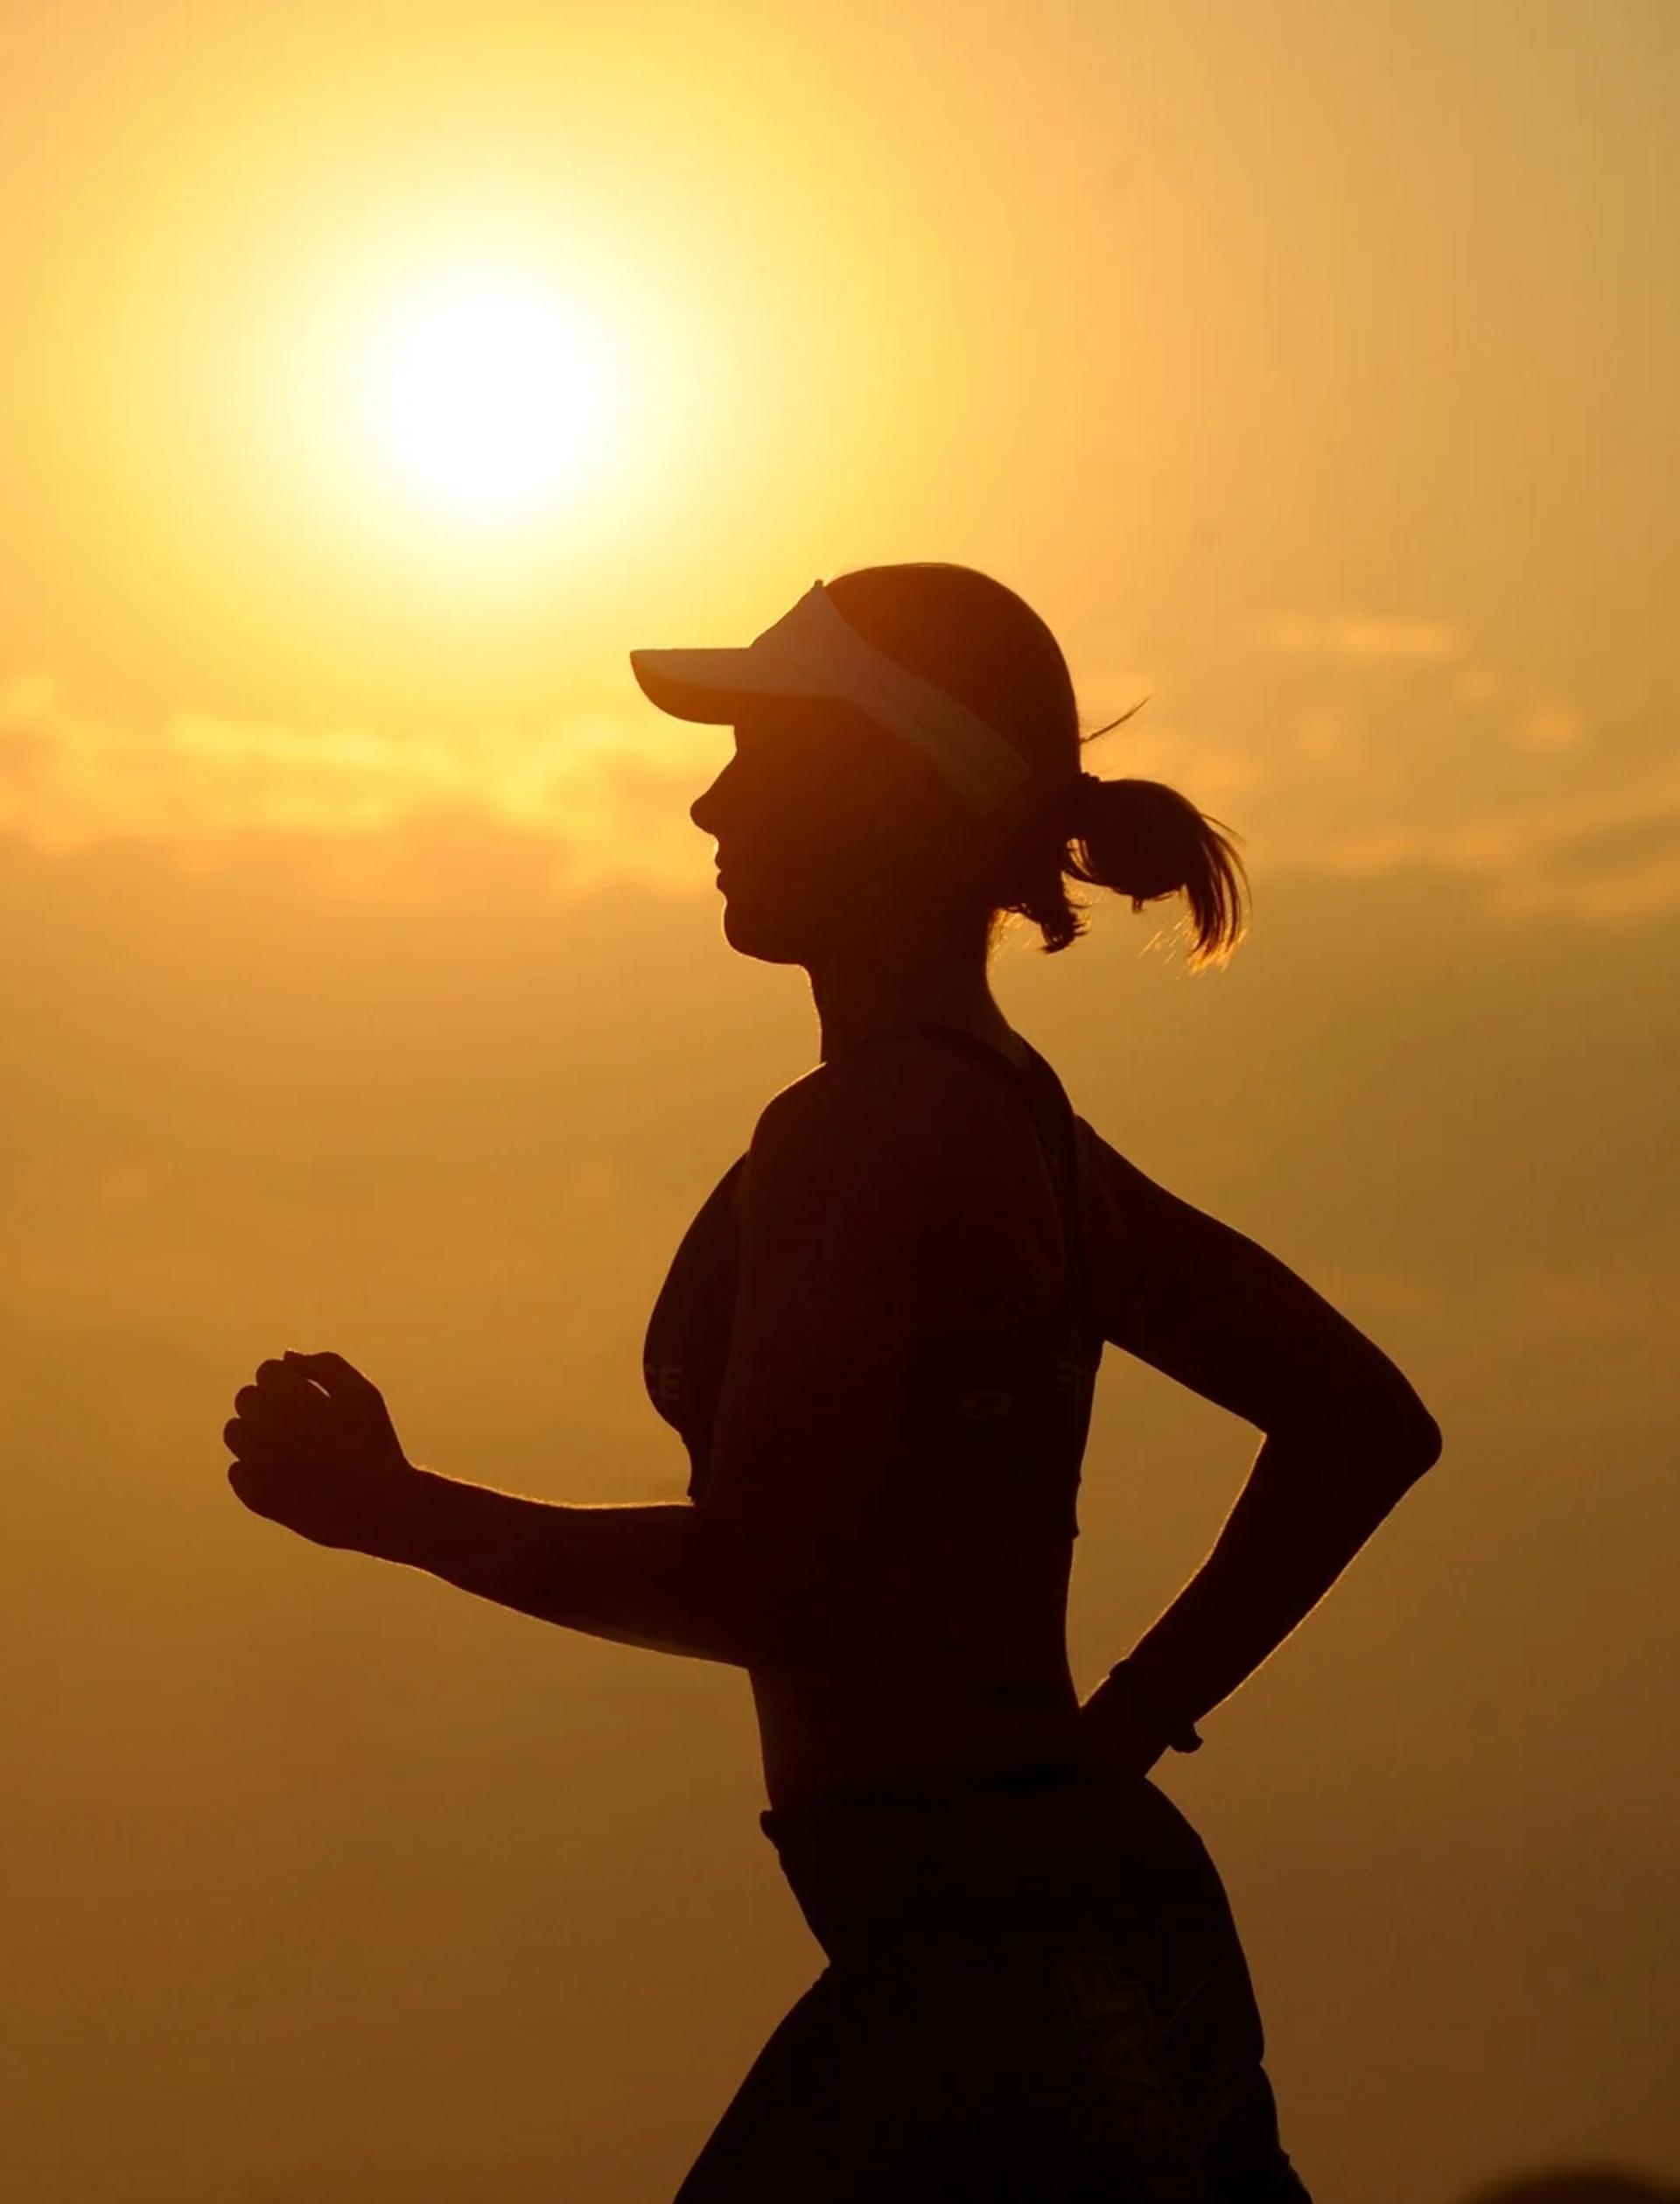 A woman in a visor running of jogging past a sunset